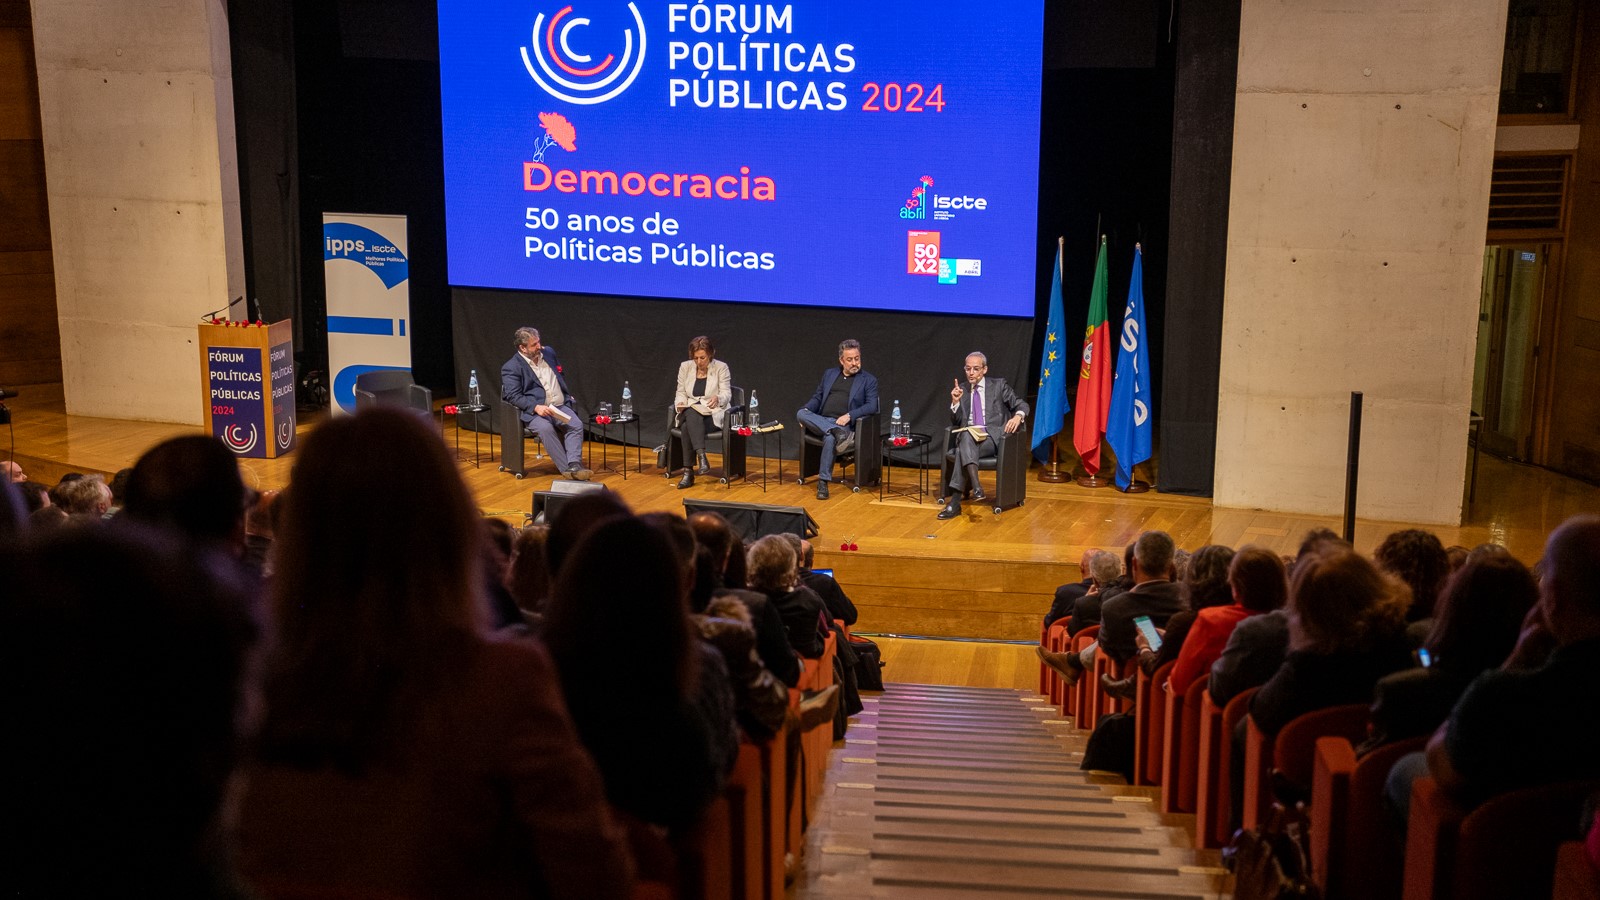 Public Policy Forum analyzes democracy 50 years after April 25